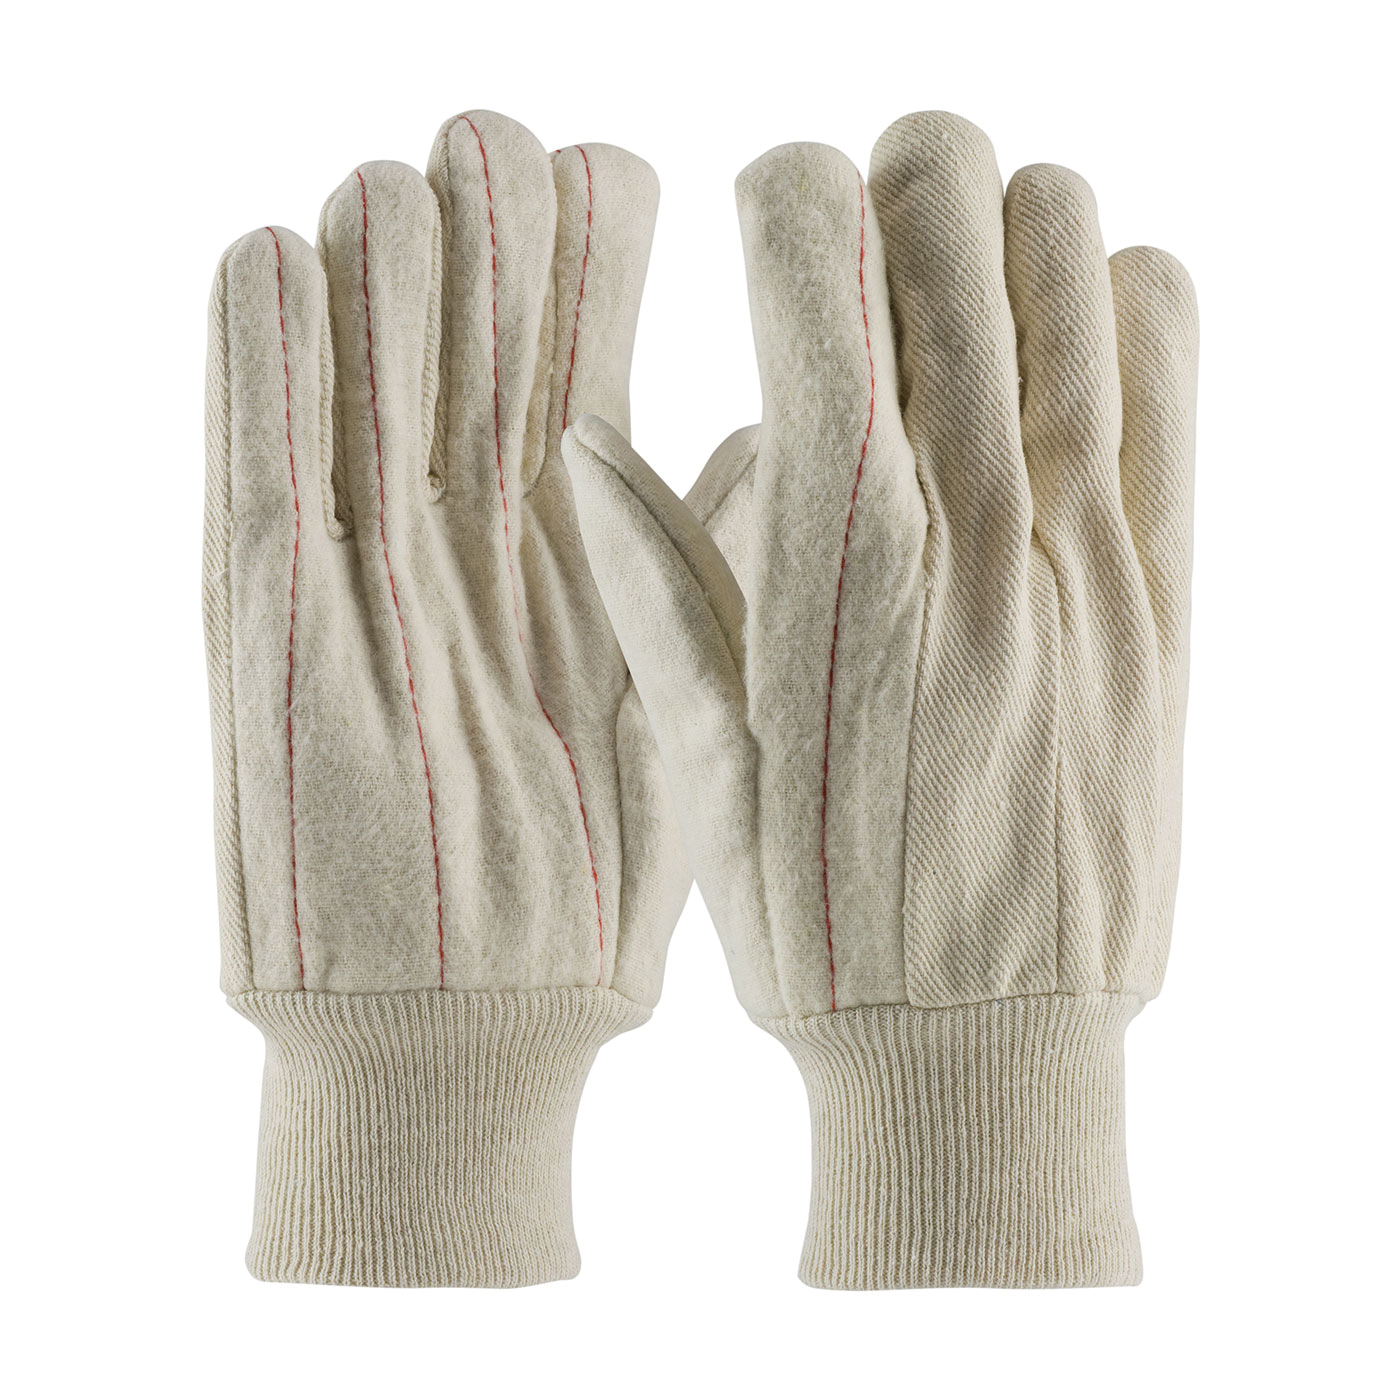 PIP® 92-918O Double Palm Men's General Purpose Gloves, Multi-Purpose/Work, Clute Cut/Full Finger/Nap-Out/Straight Thumb Style, Universal, Cotton/Canvas Palm, 60% Cotton/40% Polyester, Natural, Knit Wrist Cuff, Uncoated Coating, Resists: Heat, Canvas Lining